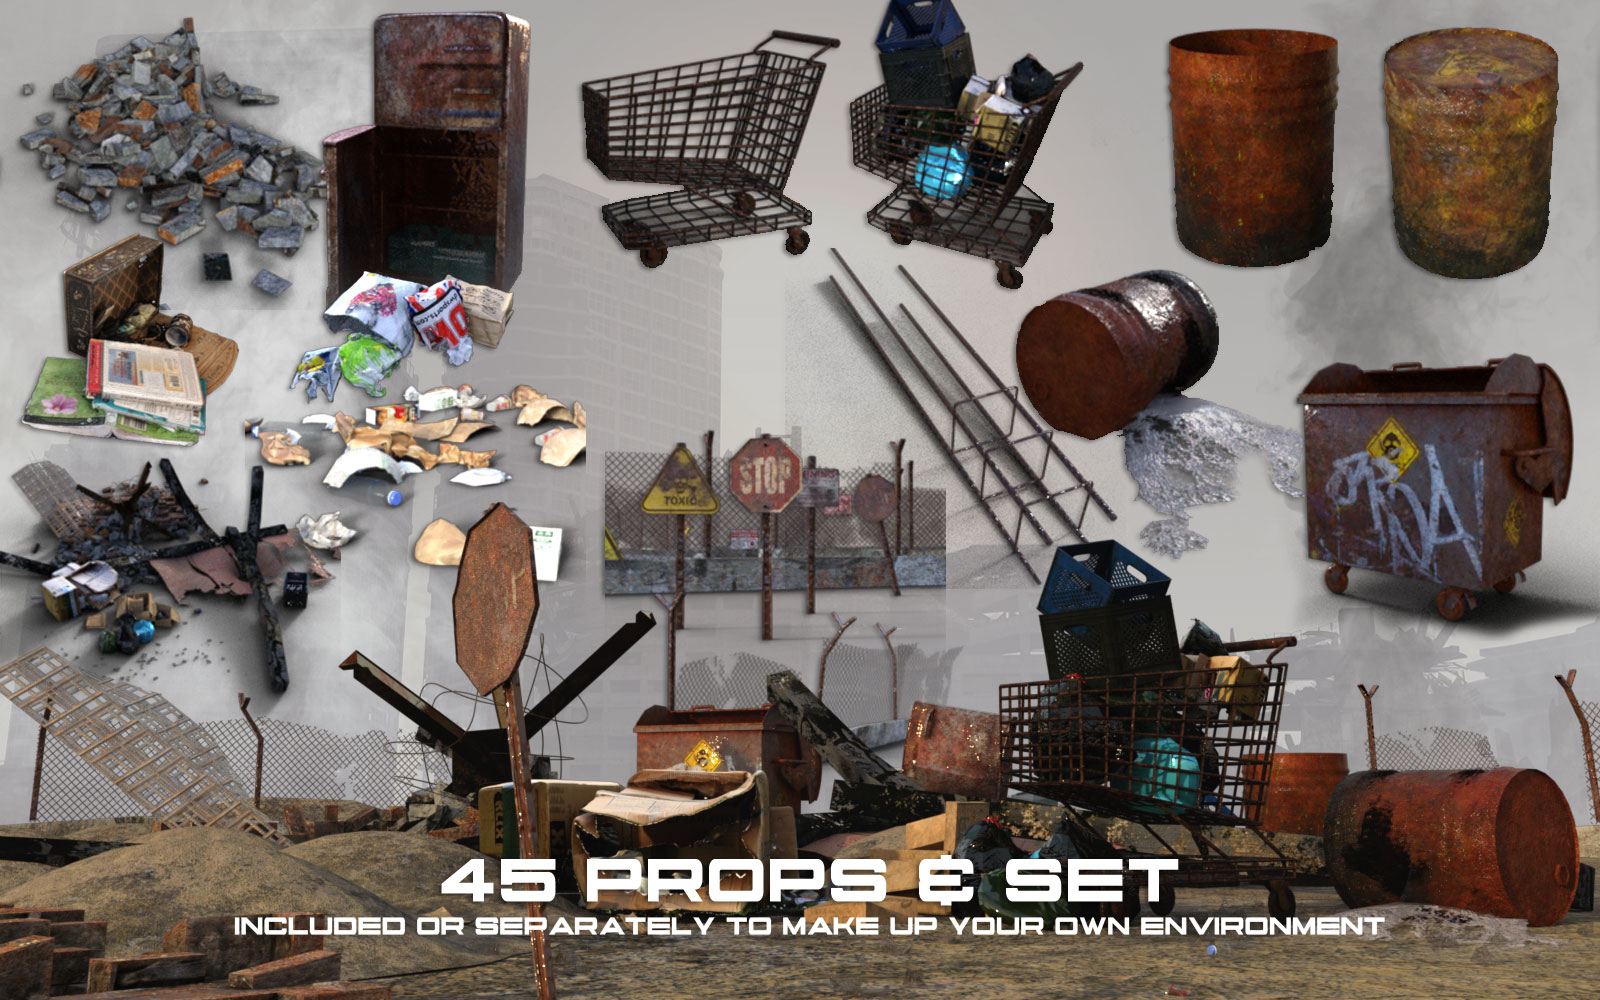 Post Apocalyptic Zone by: Ansiko, 3D Models by Daz 3D